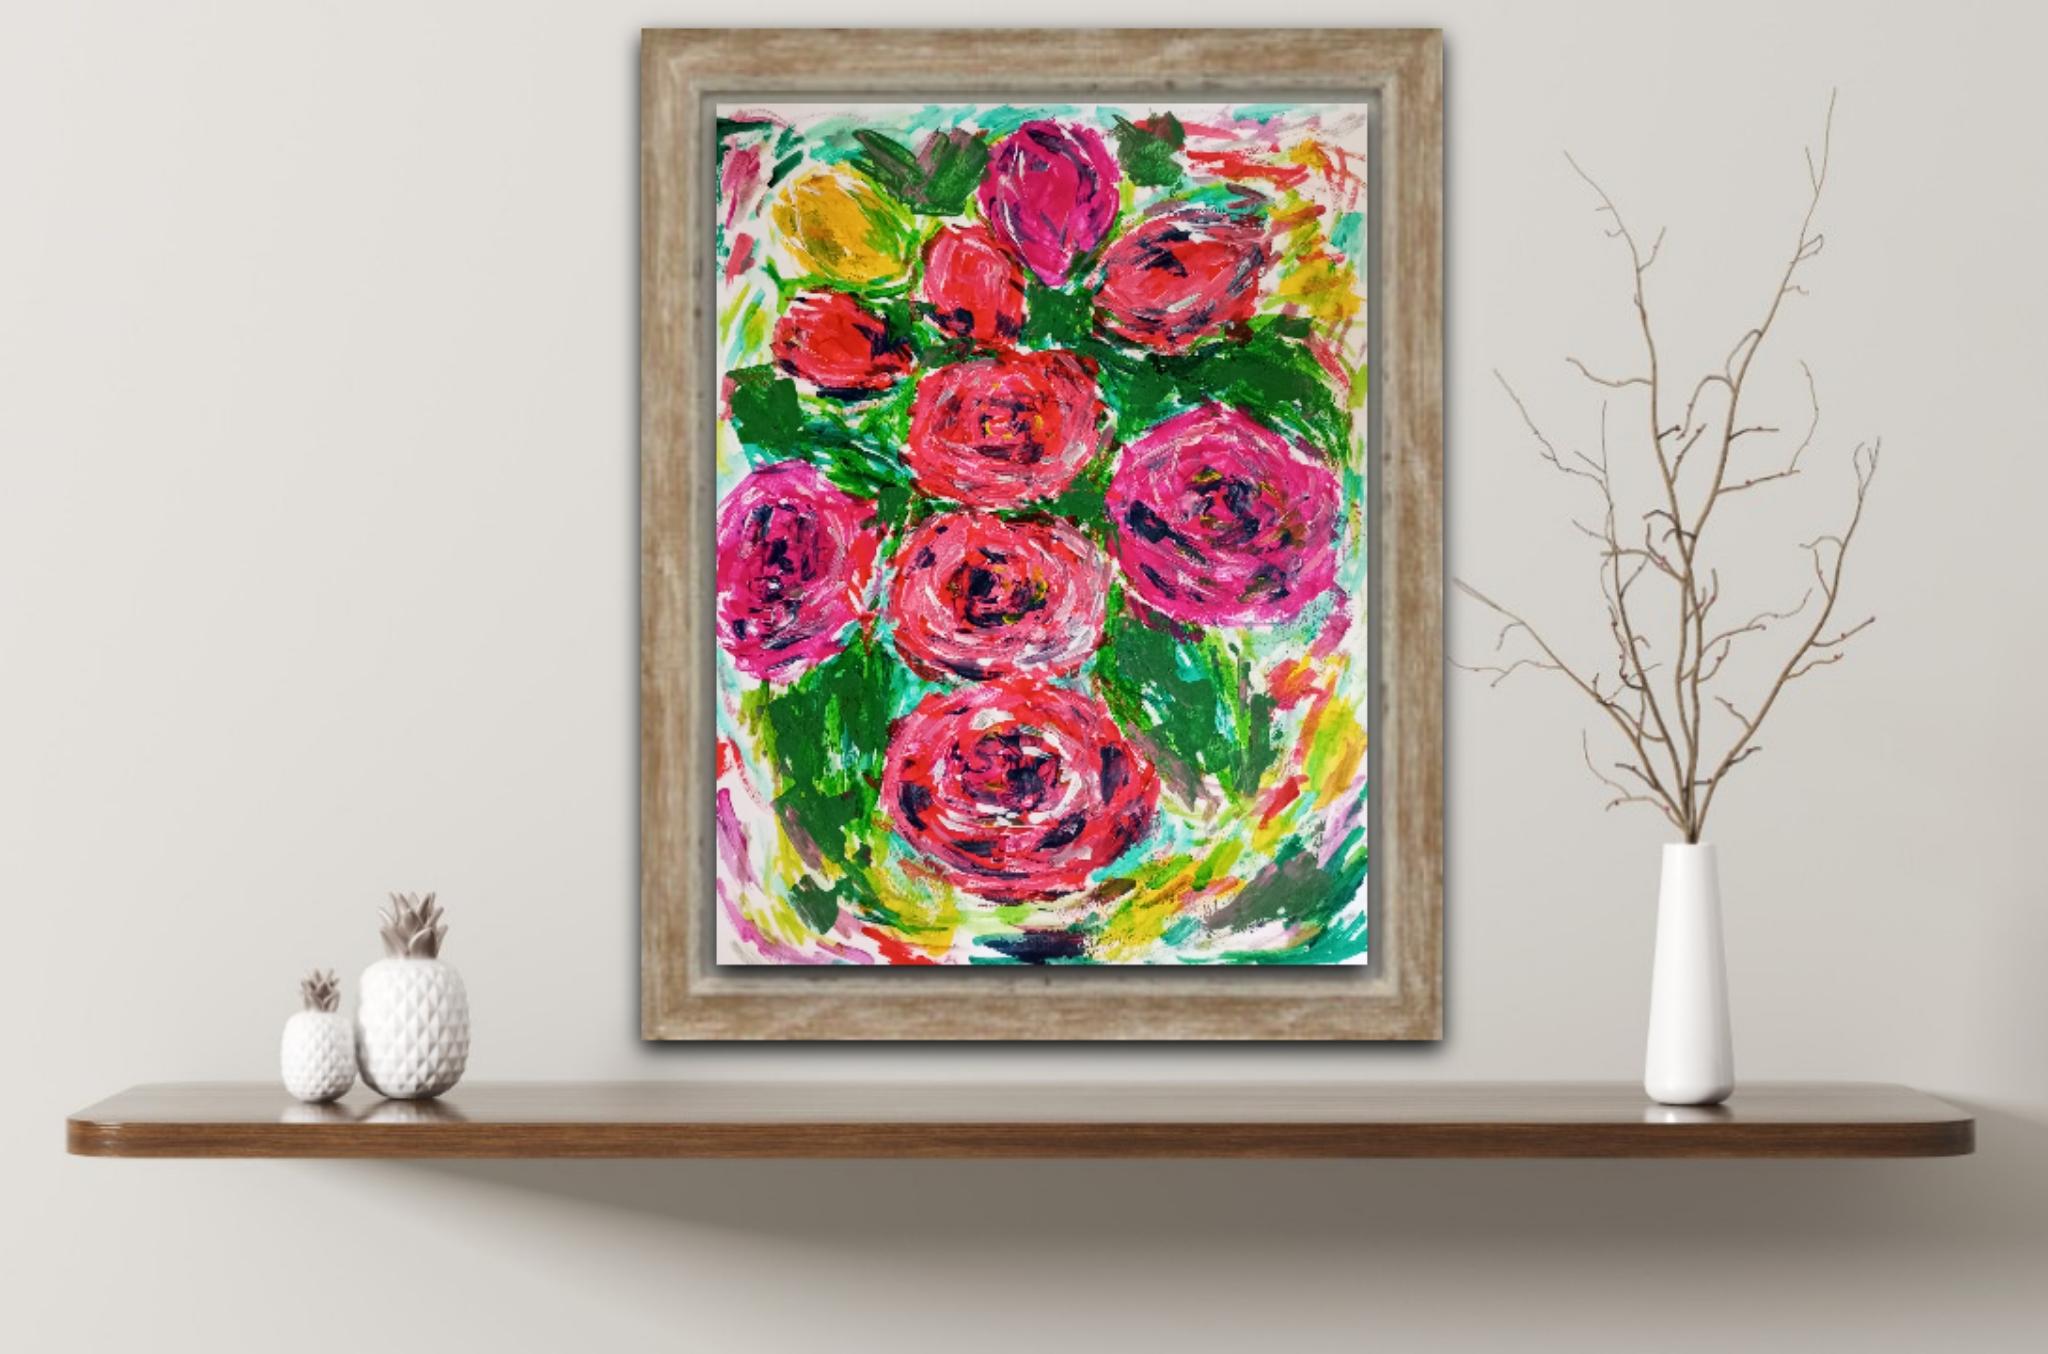 Dear art lover,

This semi-abstract vibrant expressive floral painting is called 